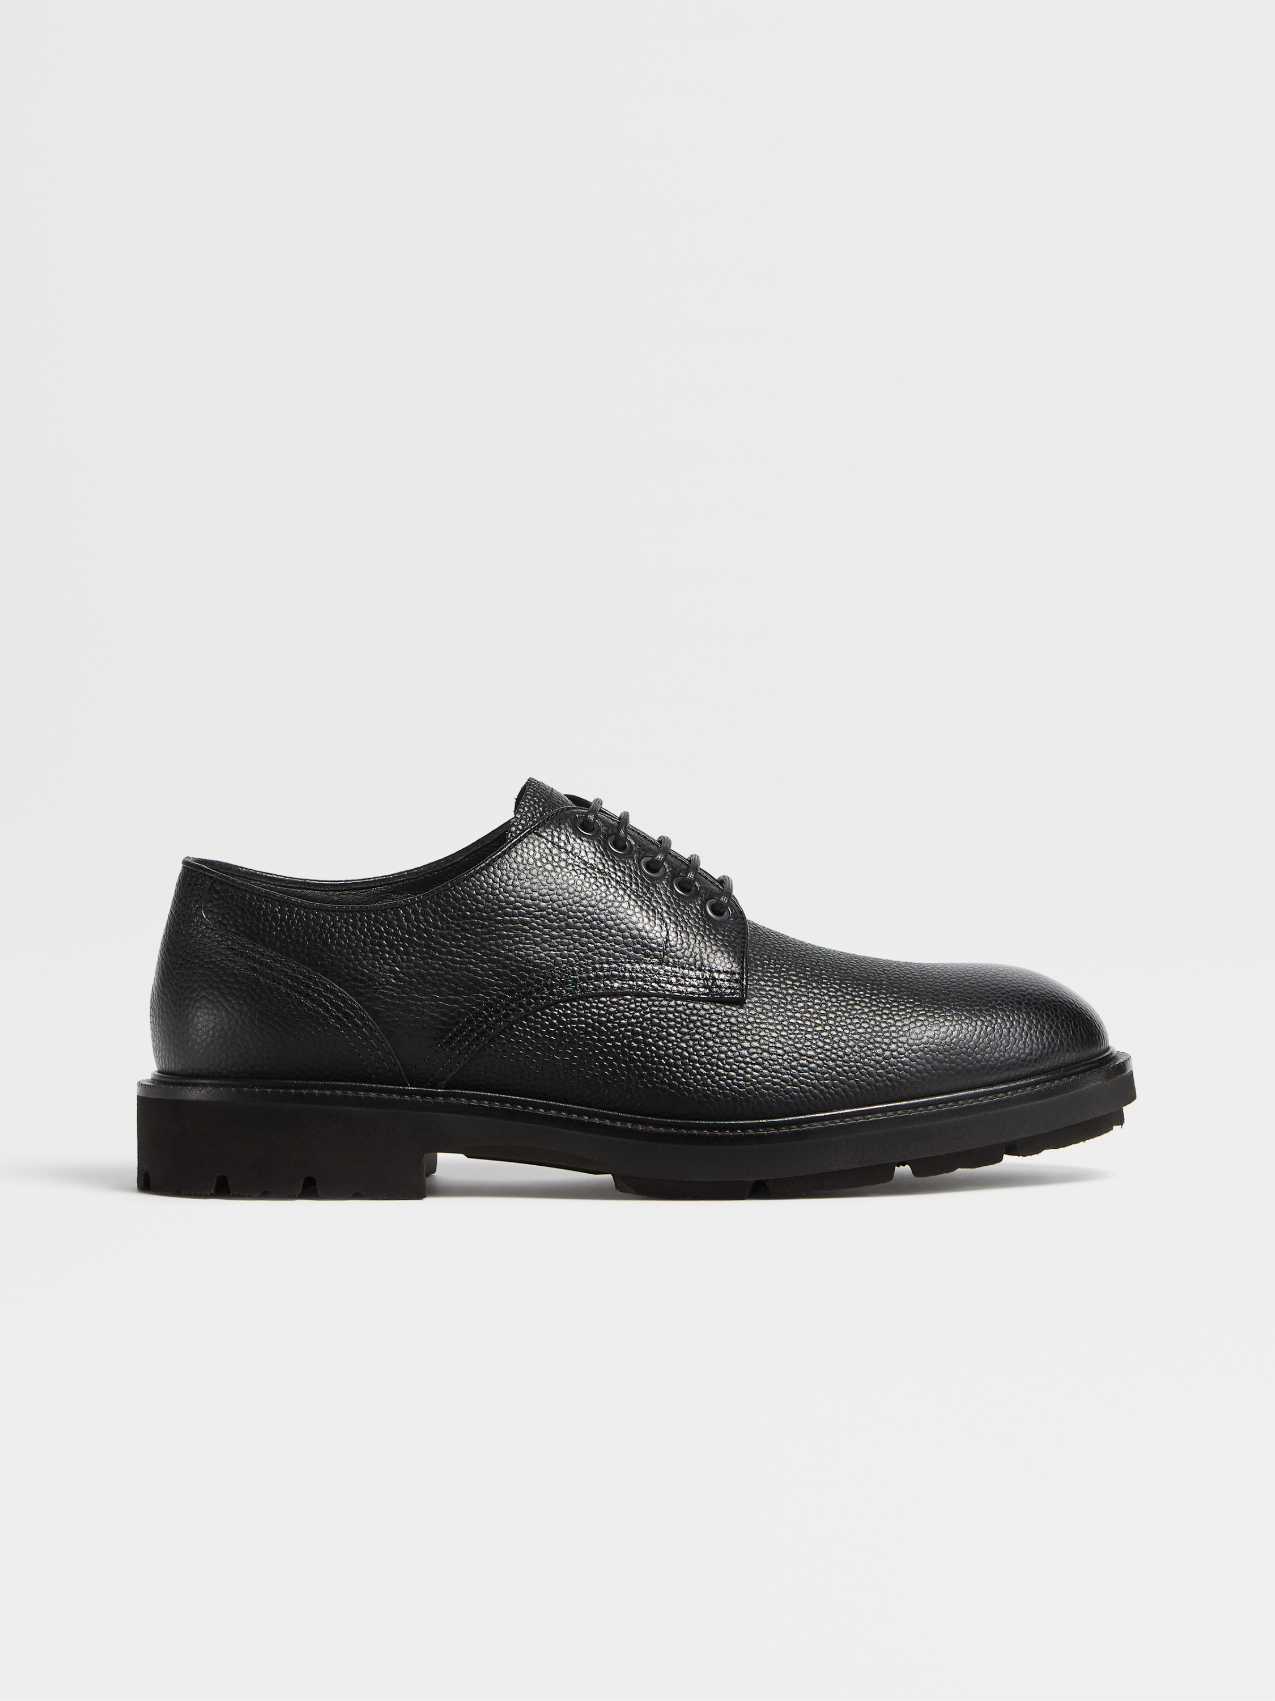 Black Leather Aosta Derby Shoes